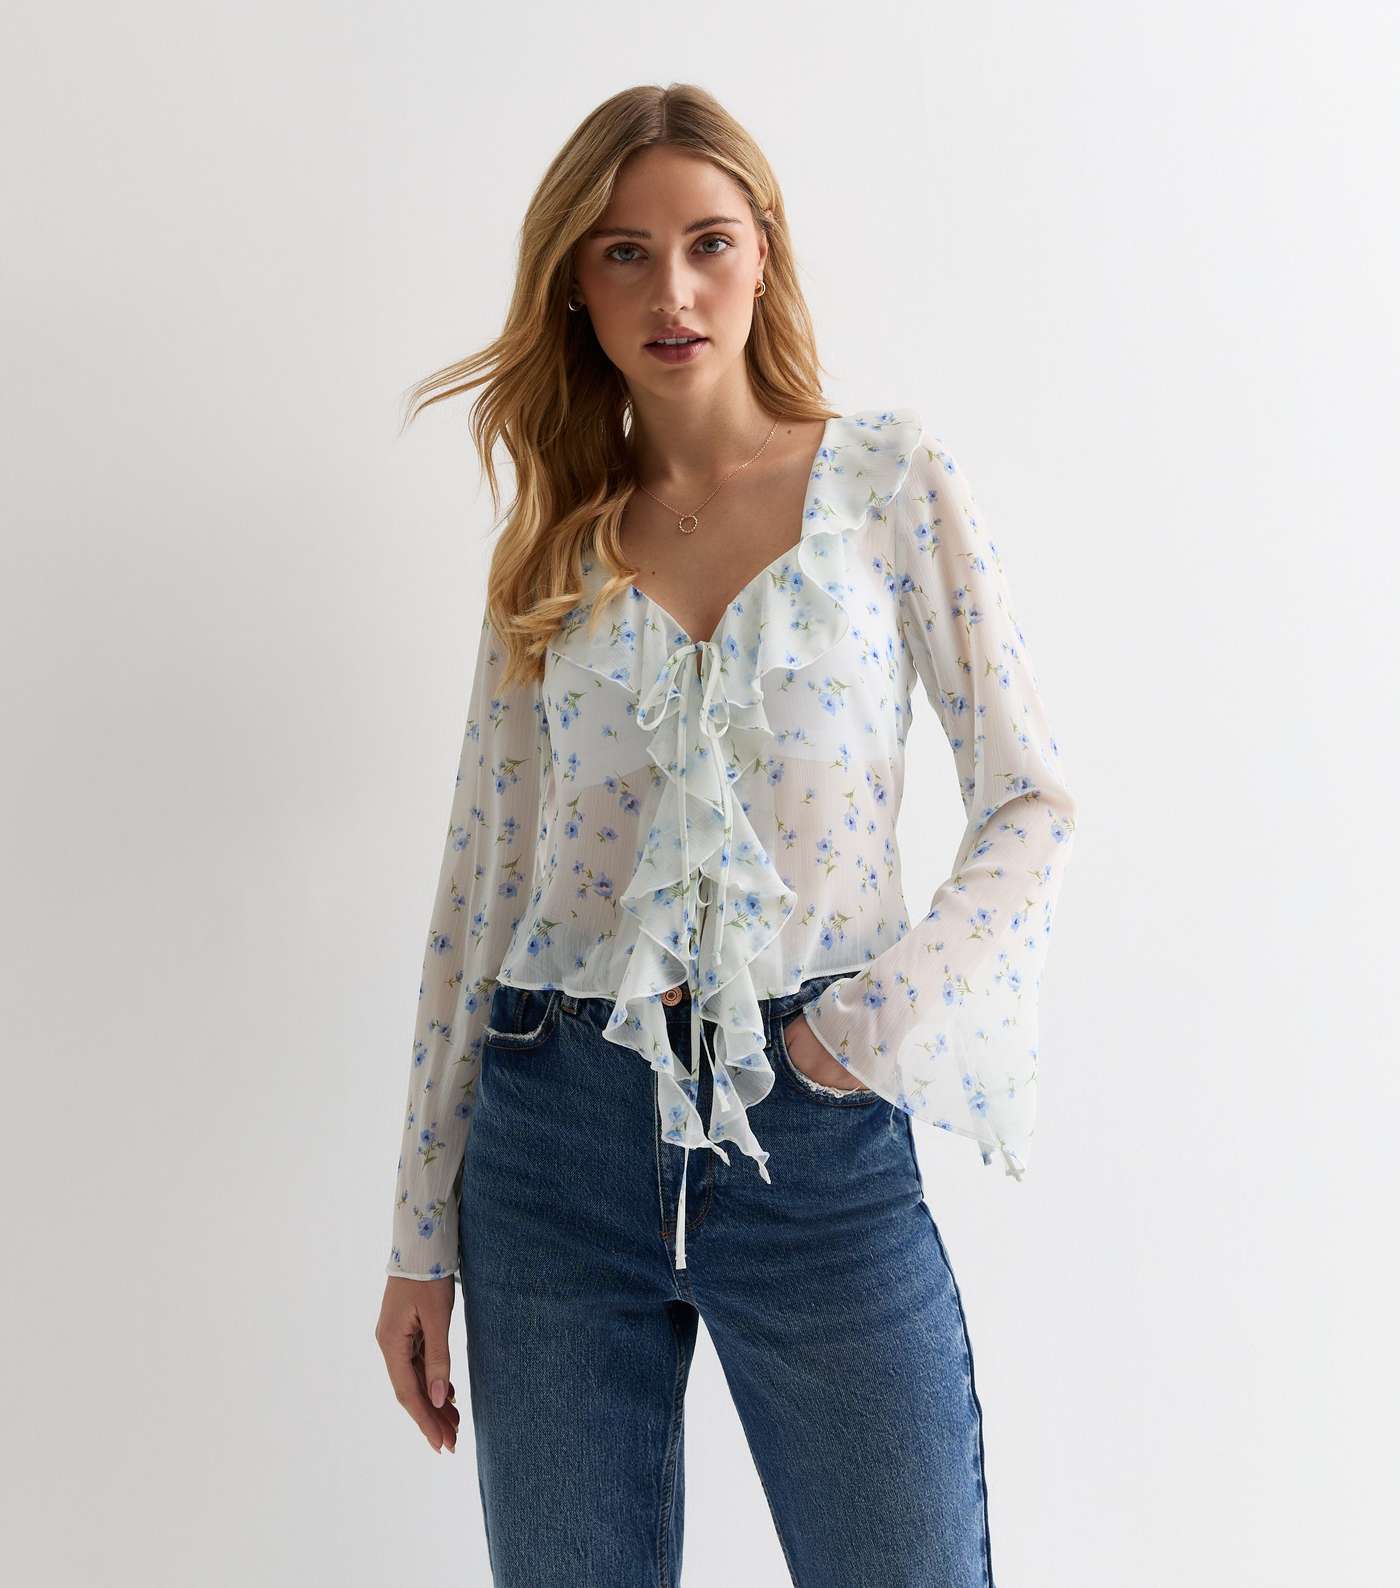 White Floral Sheer Ruffle Tie Front Blouse Image 3